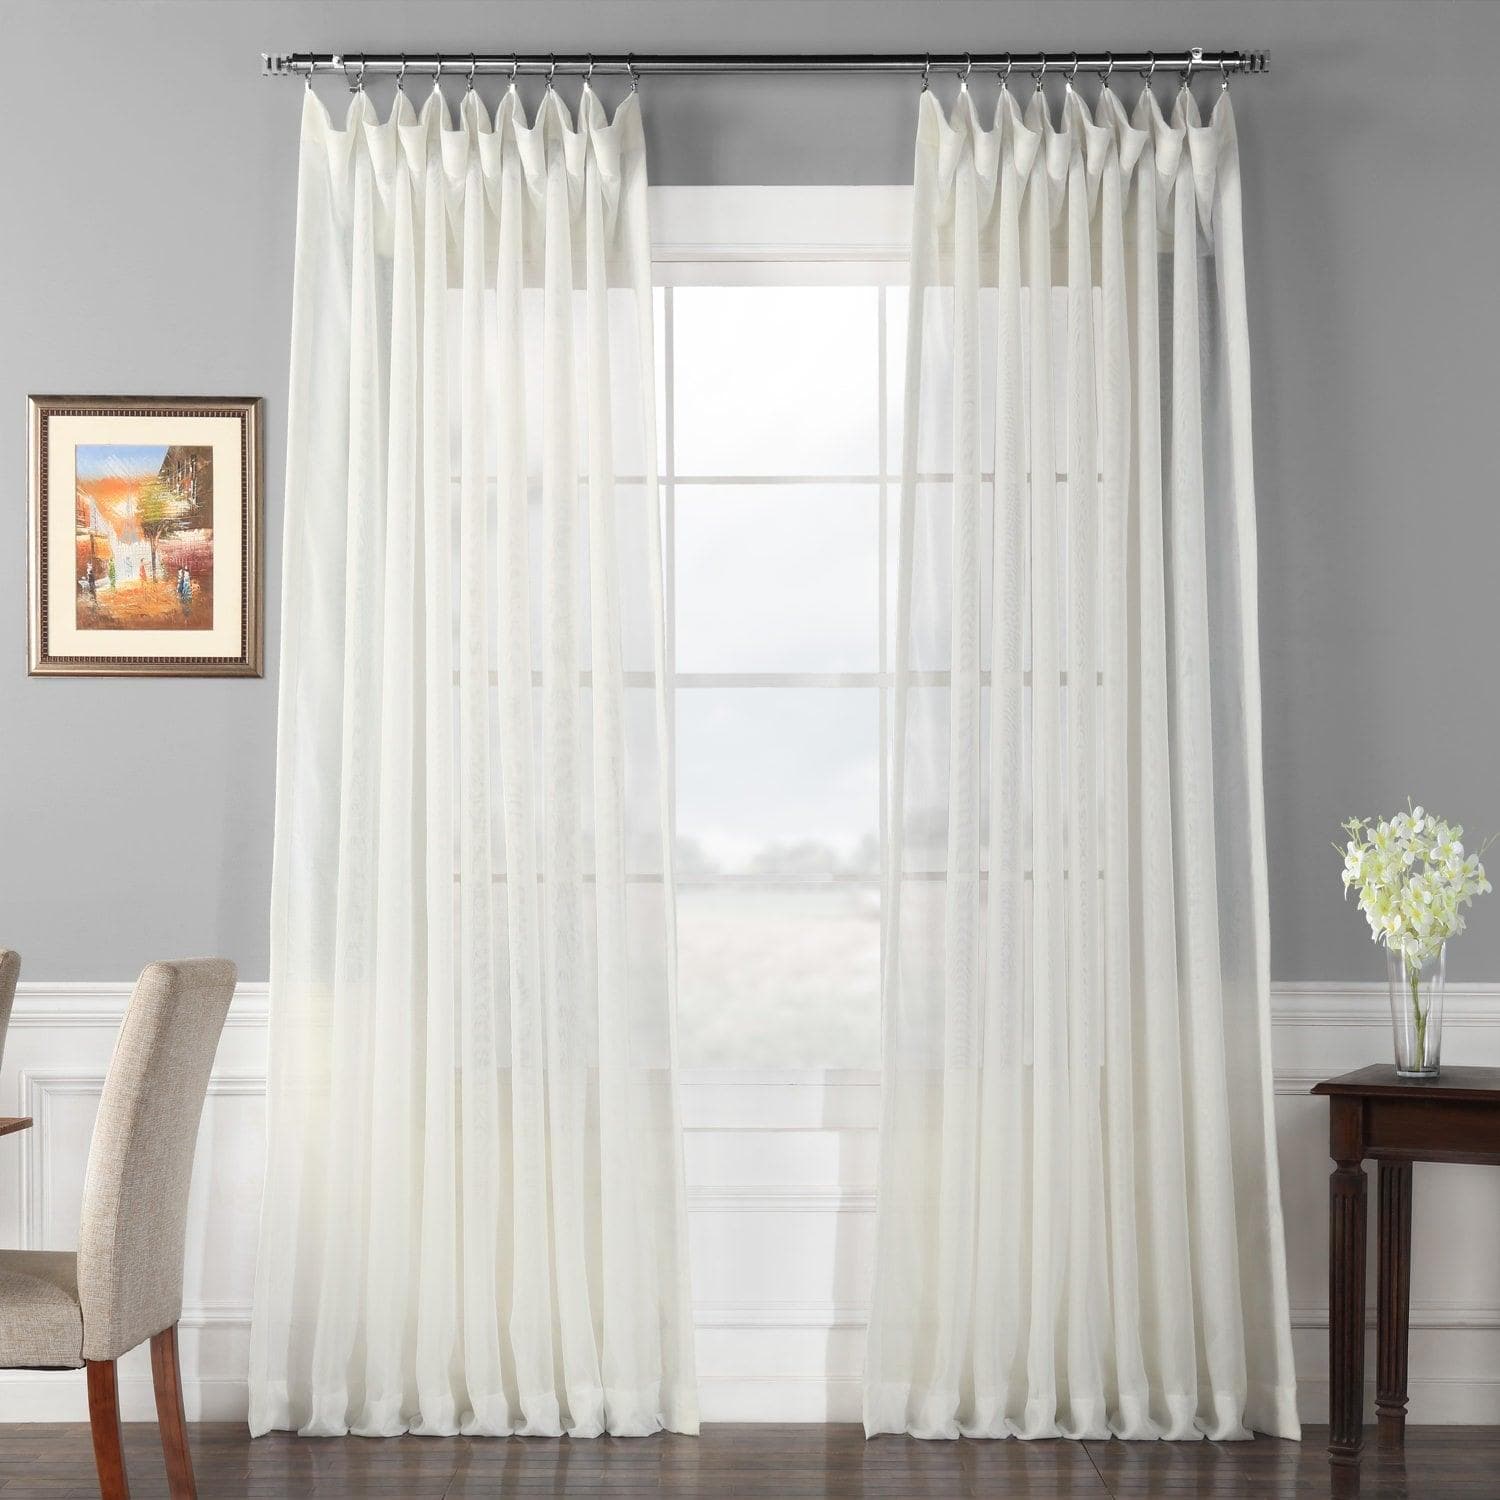 Double Layered Off White Extra Wide Voile Sheer Curtain